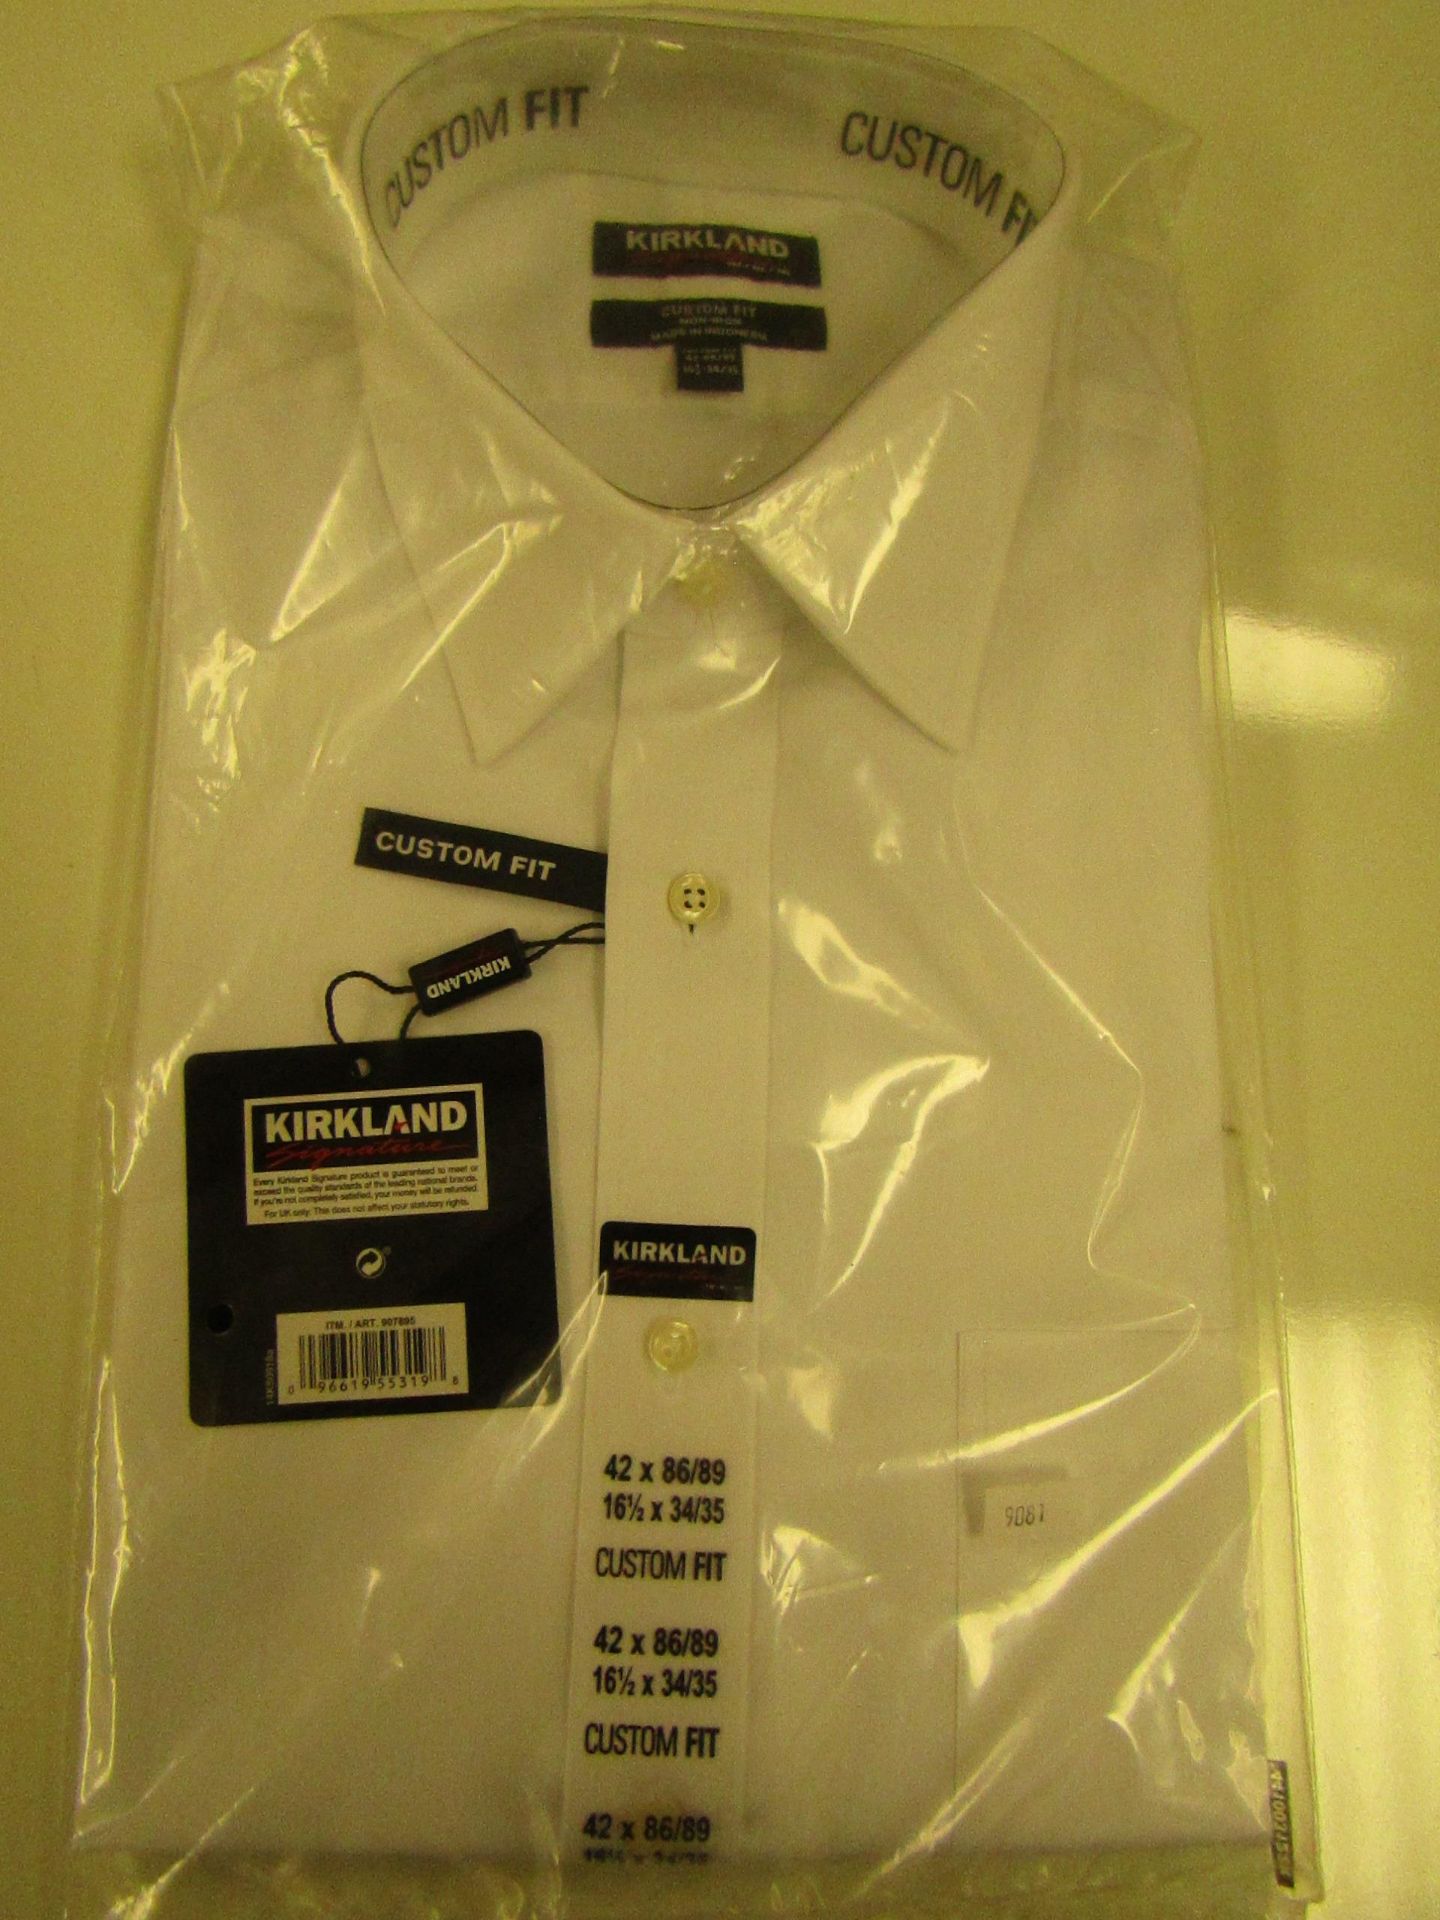 Kirkland Signature Custom Fit White Long Sleeve Shirt Size 16.5" X34 X 35 New in Packaging